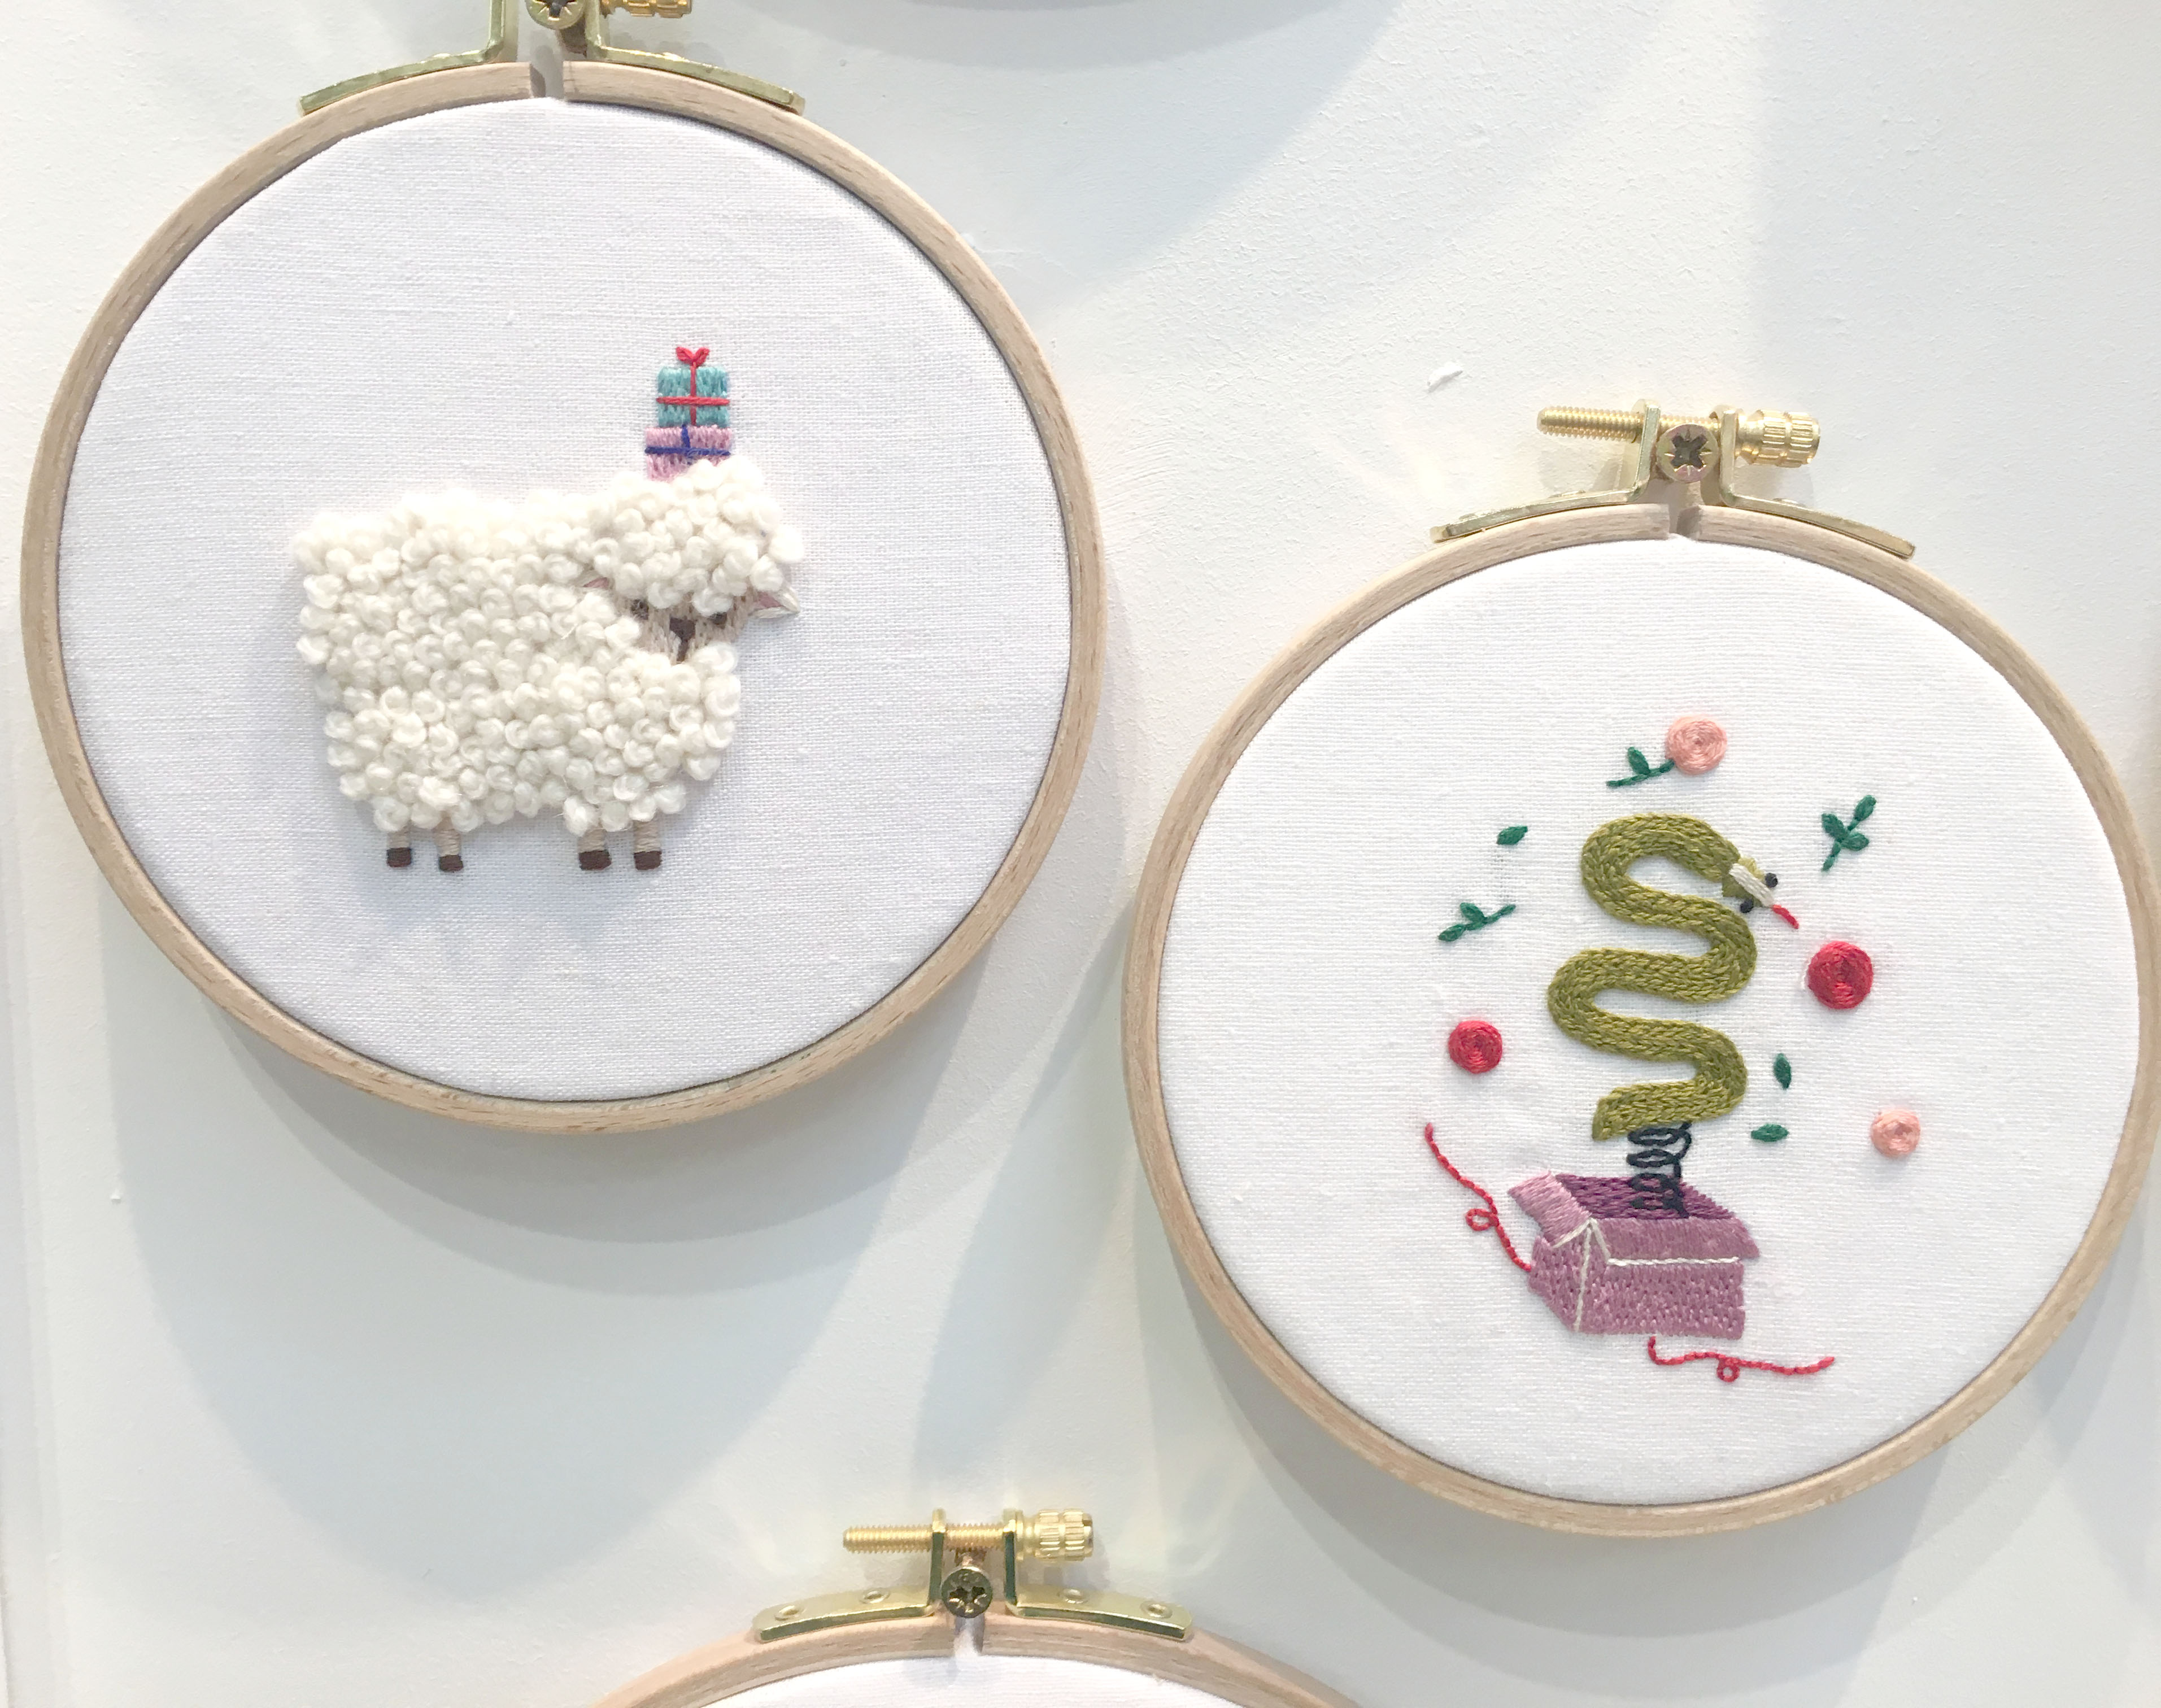 Sheep and snake embroidery in wooden embroidery hoops